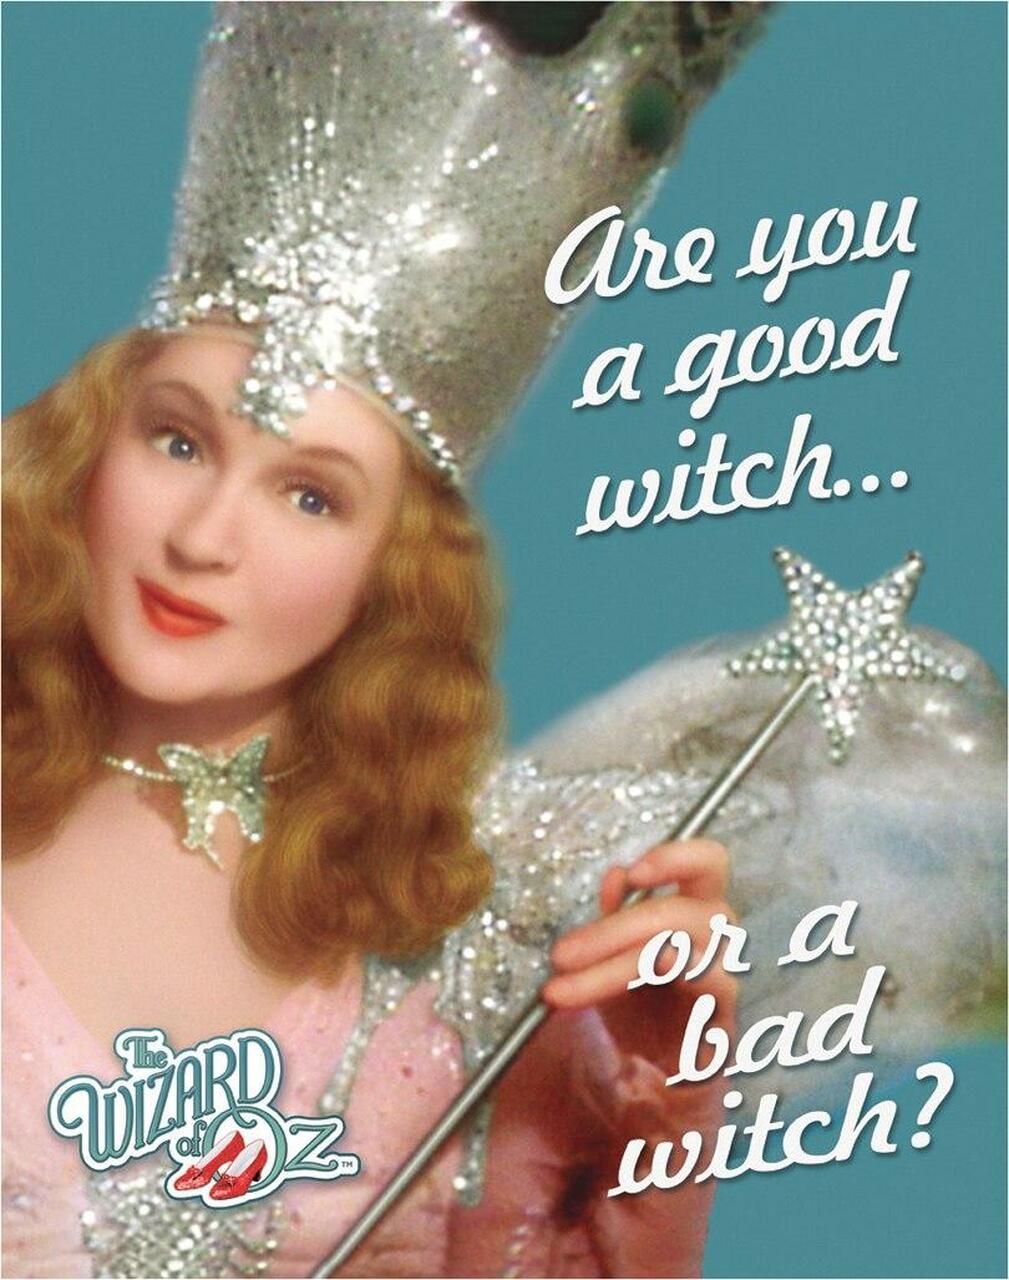 Wizard of Oz - Are you aa good witch or a bad witch? - Tin Sign